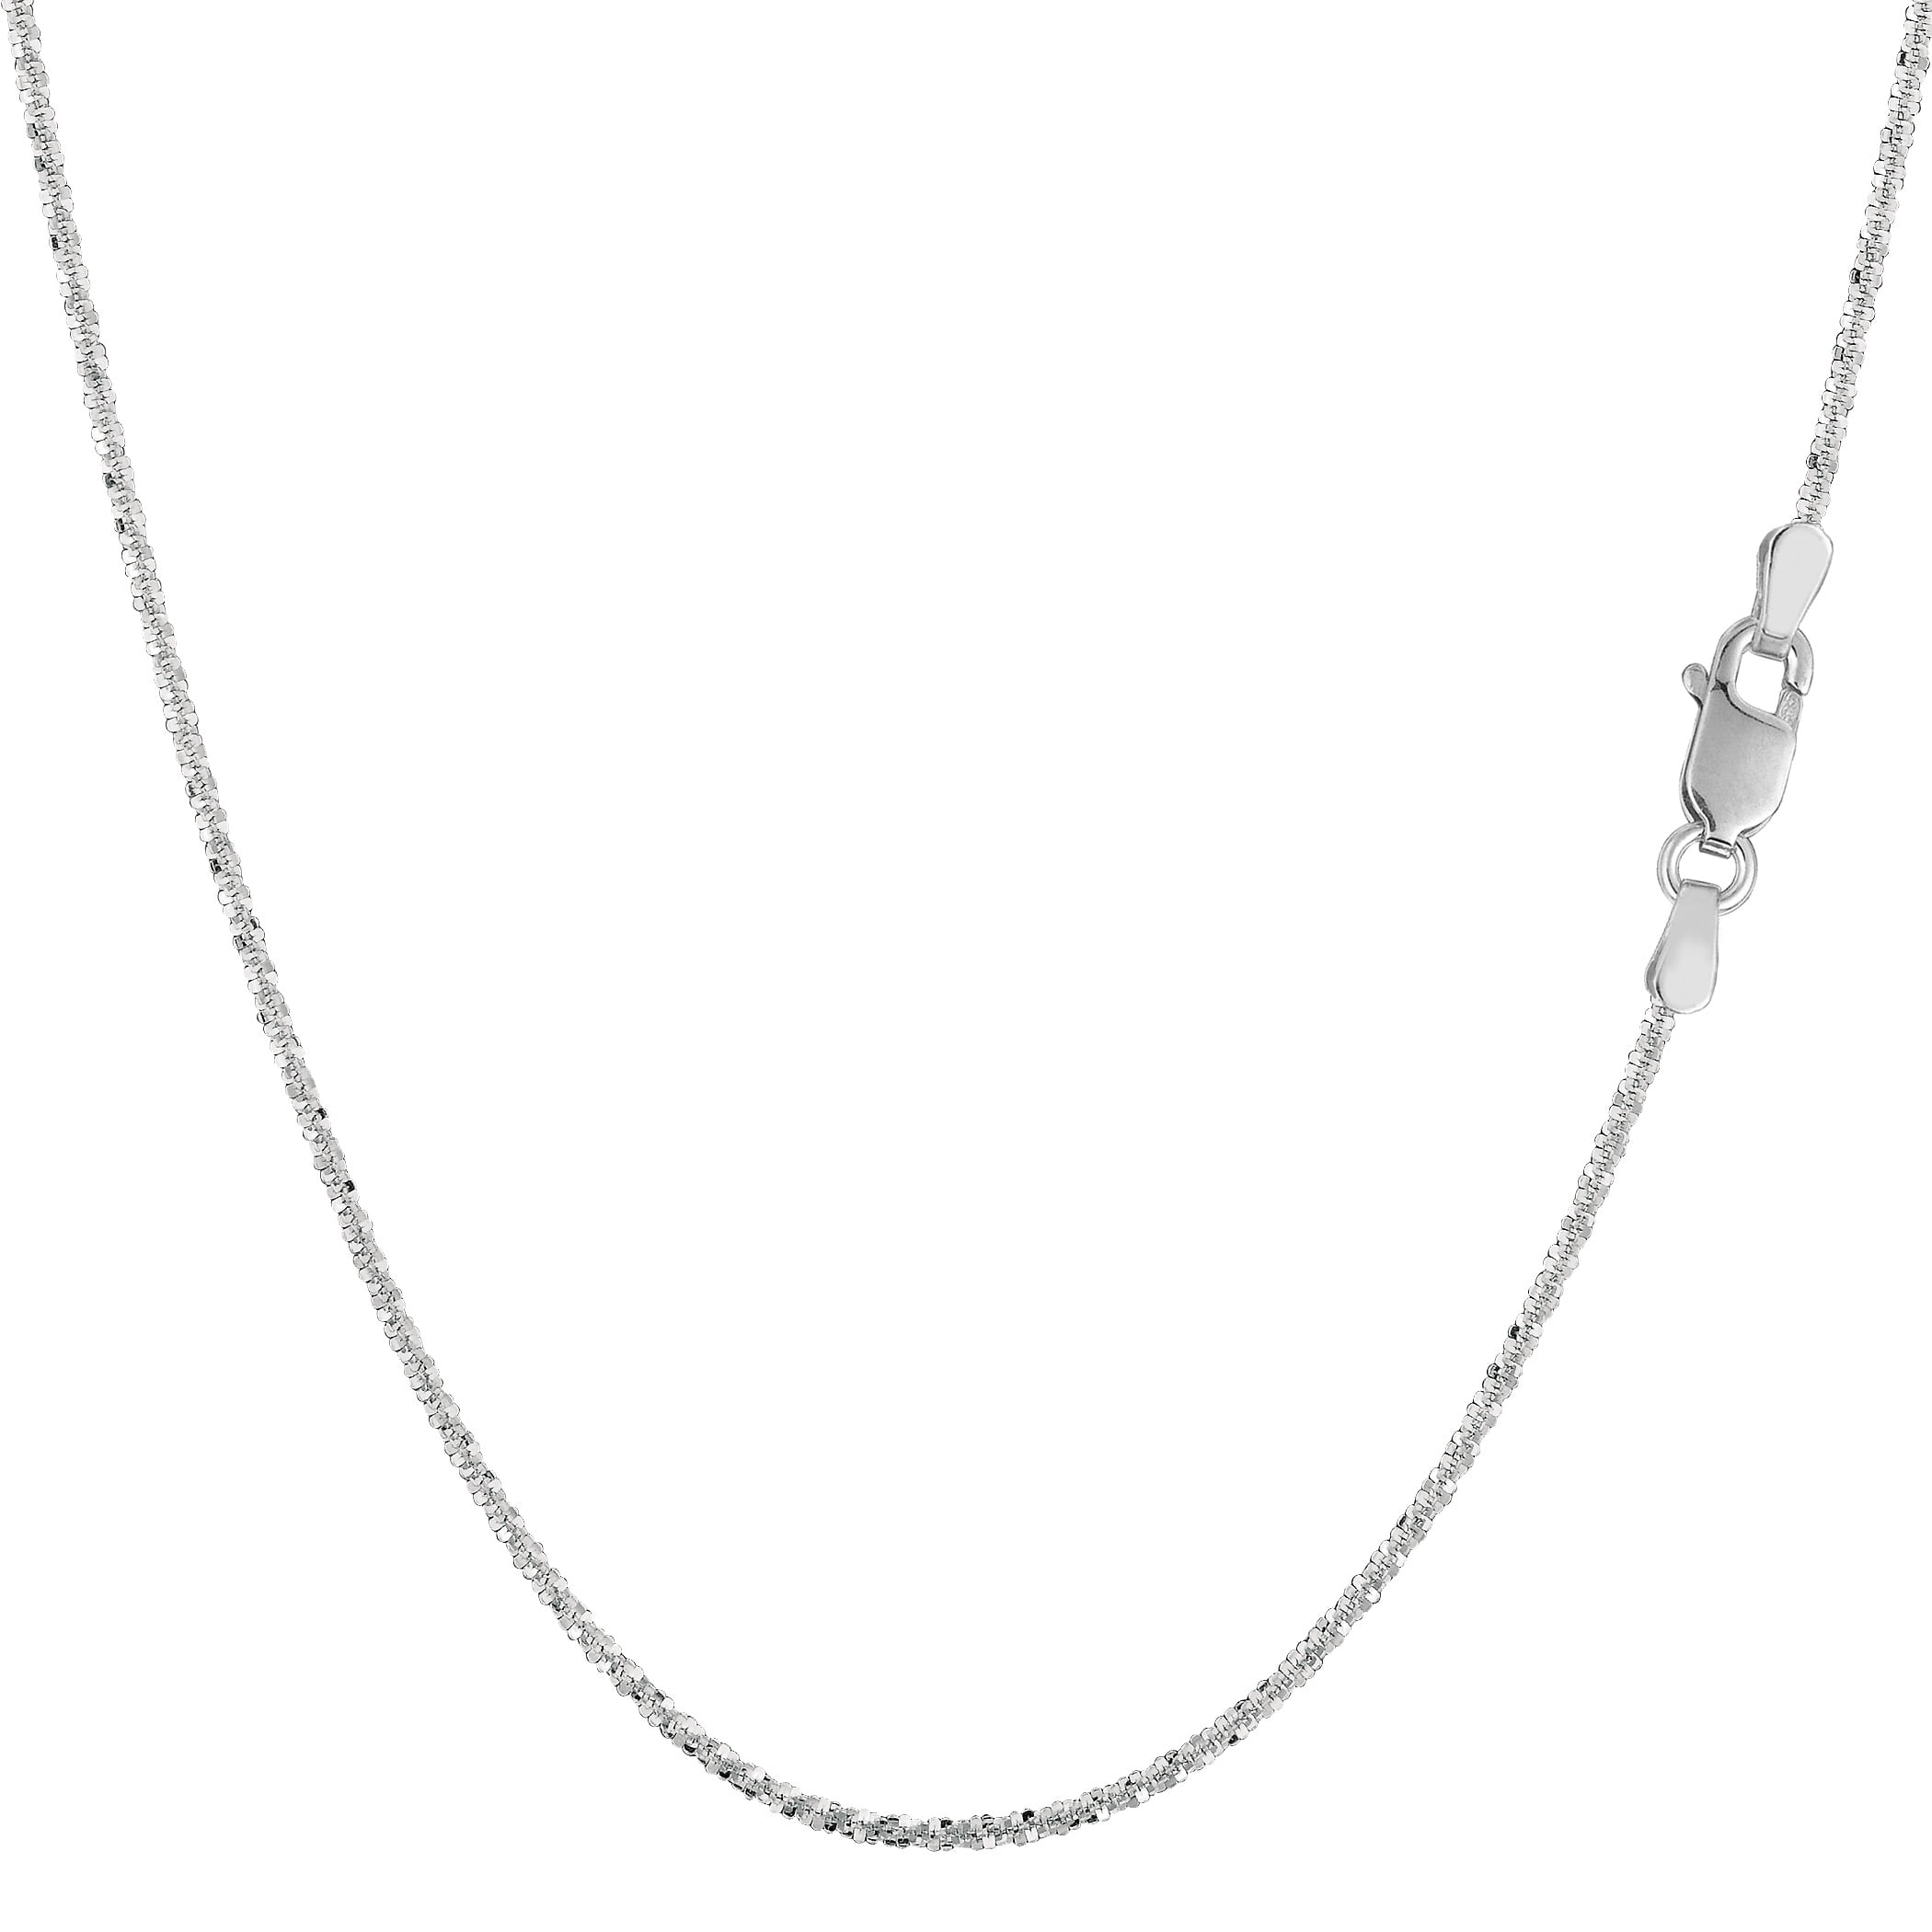 14k White Gold Sparkle Chain Necklace, 0.9mm, 18